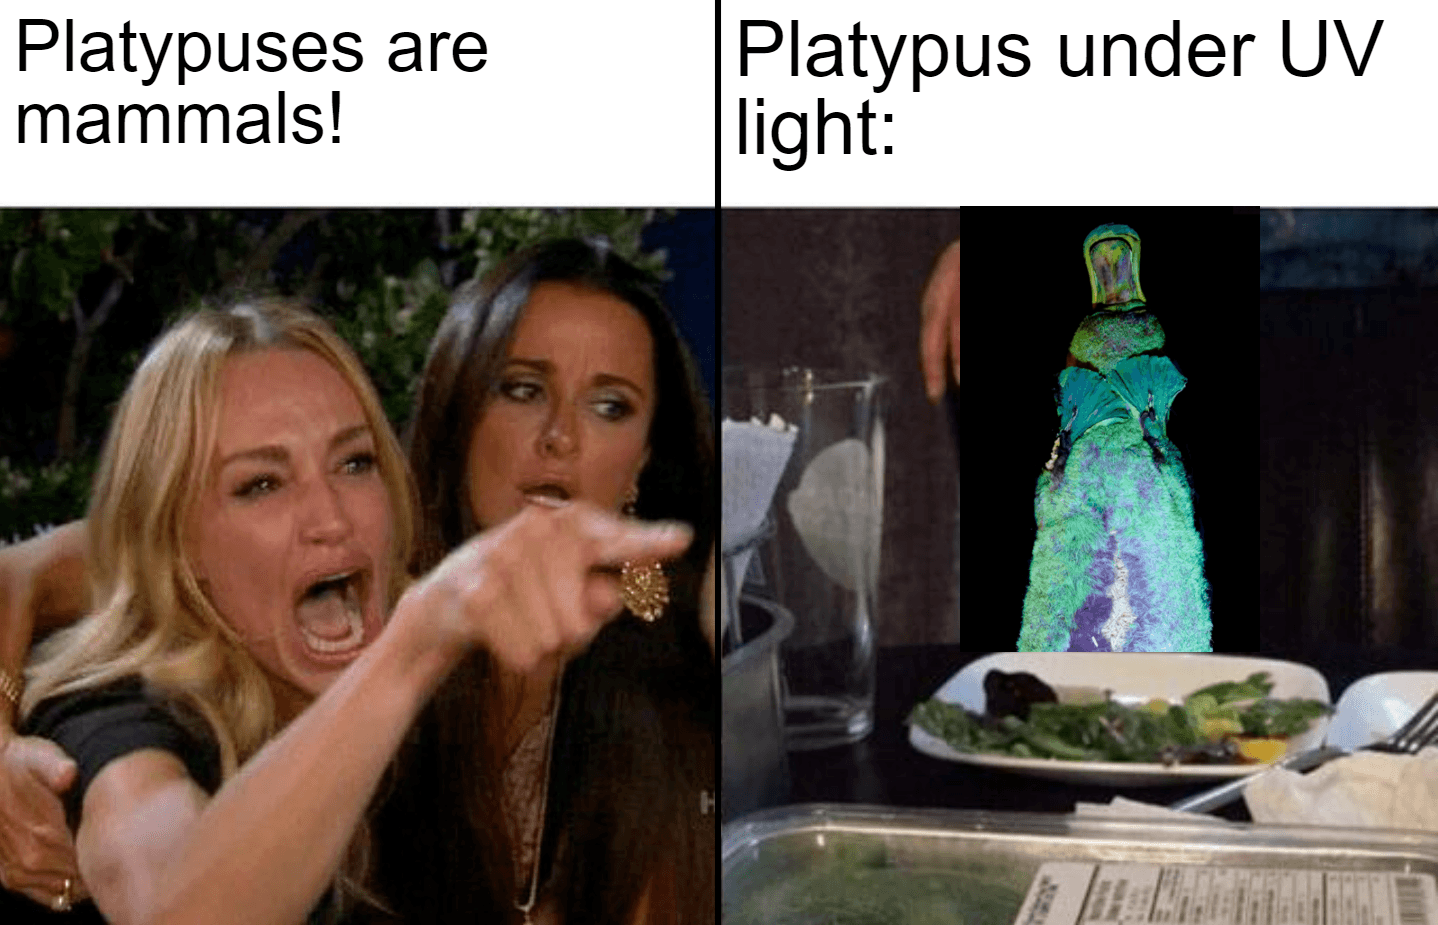 A play on the "woman yelling at cat" meme: A woman yells "platypuses are mammals!" in one panel, and the platypus glowing under UV light is shown in the second panel